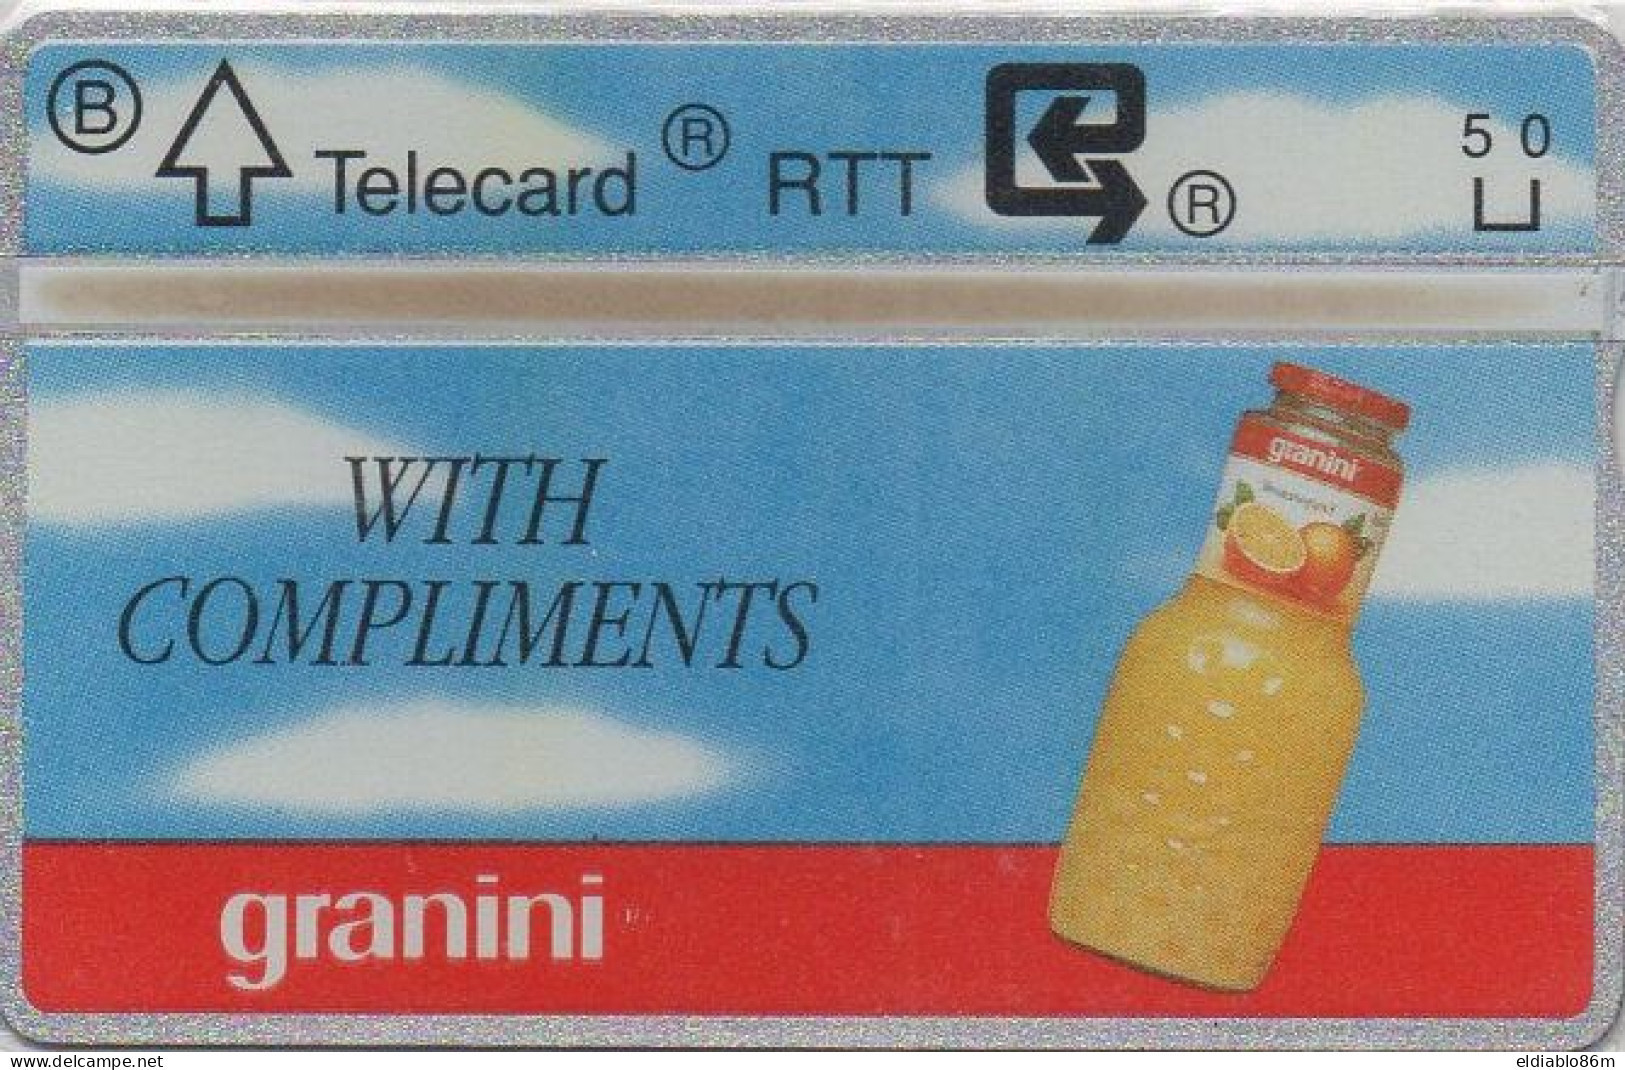 BELGIUM - L&G - P261 - GRANINI - WITH COMPLIMENTS - MINT - Zonder Chip